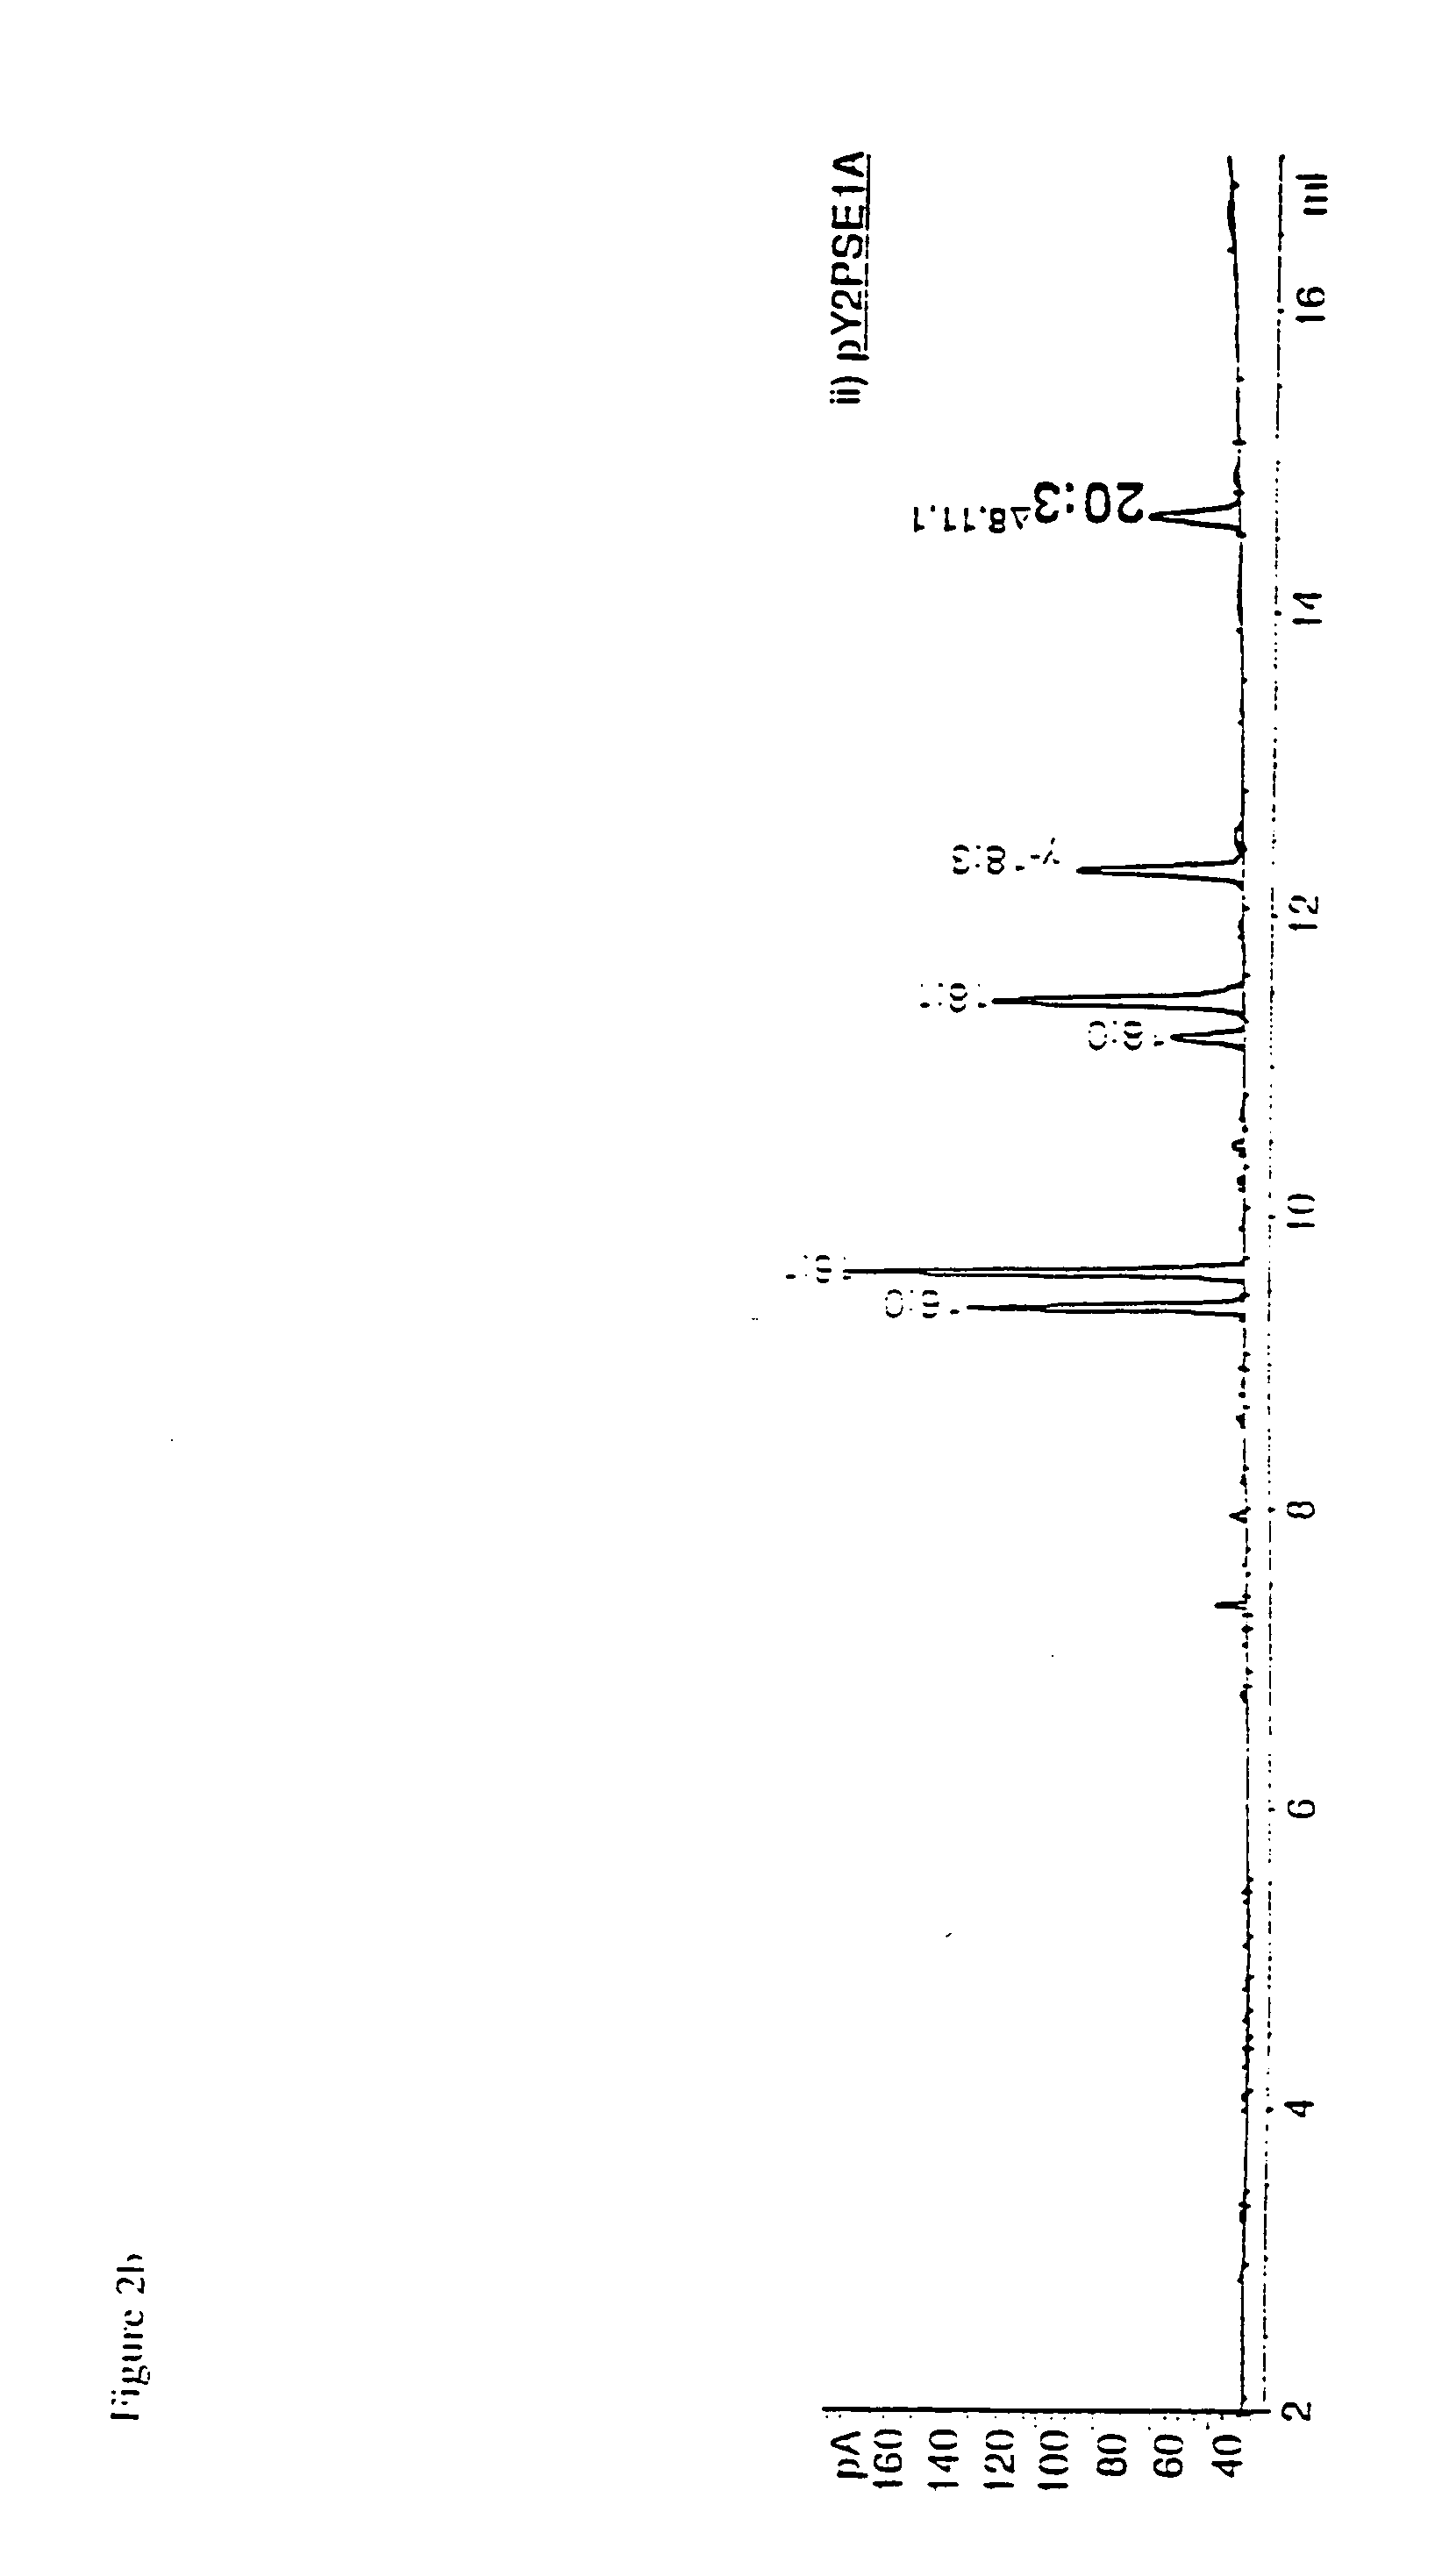 Novel elongase gene and method for producing multiple-unsaturated fatty acids